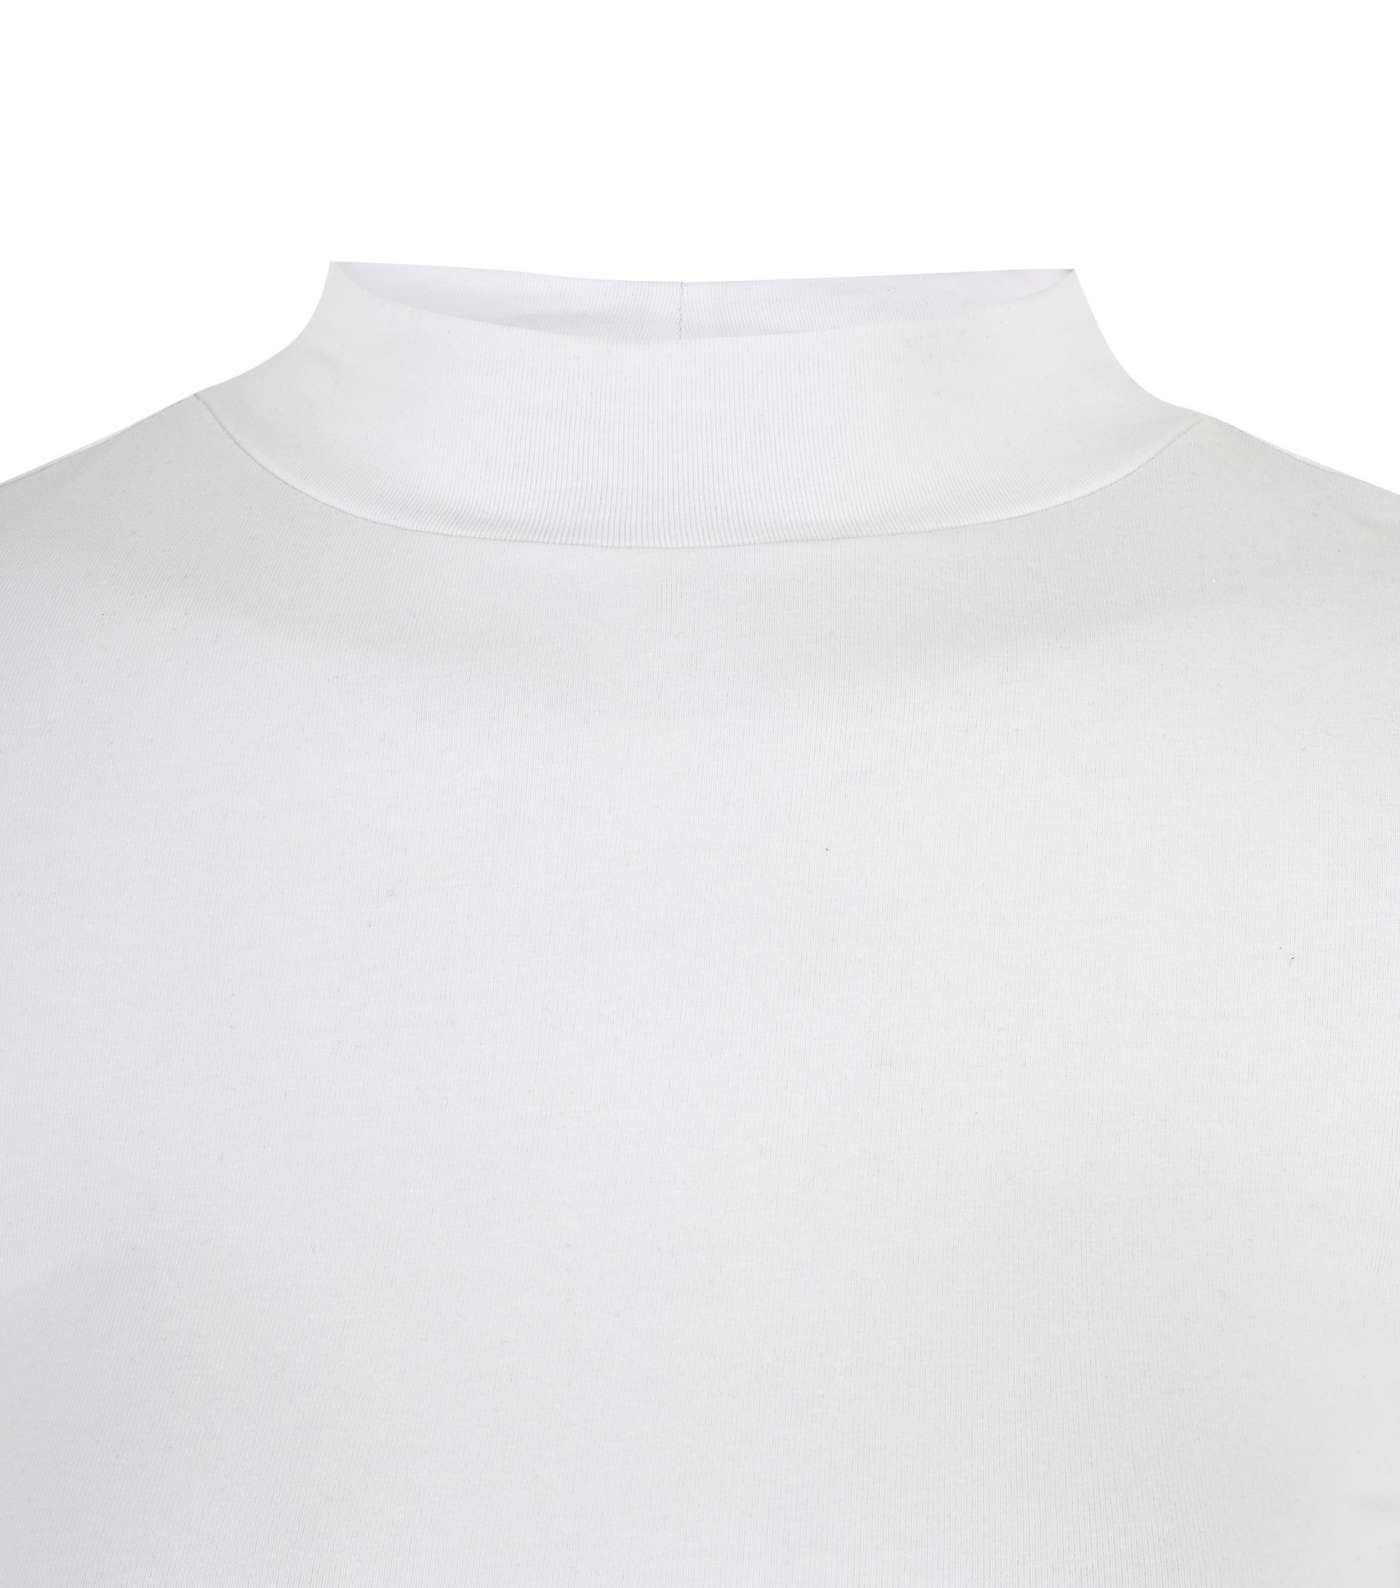 White High Neck Long Sleeve Top Image 3